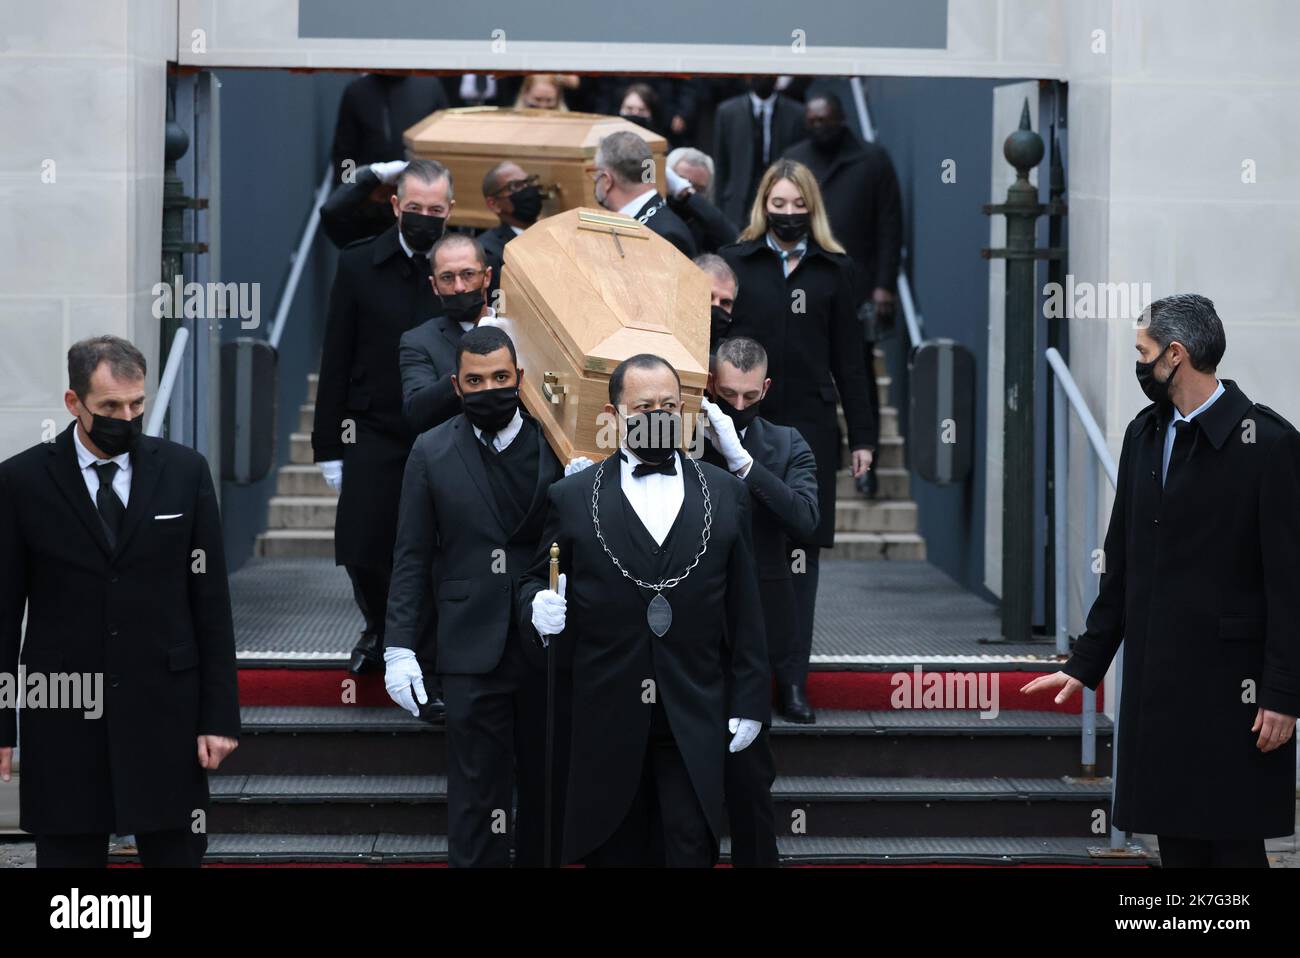 ©PHOTOPQR/LE PARISIEN/LP / Arnaud Journois ; PARIS ; 10/01/2022 ; OBSEQUES DES FRERES IGOR ET GRICHKA BOGDANOFF A LA MADELEINE A PARIS - Paris, France, jan 10th 2021. Igor and Grichka Bogdanoff, known as brothers Bogdanoff, funerals Twin brothers died six days apart from Covid-19 A mass in homage to Igor and Grichka Bogdanoff will be celebrated Monday at 3 p.m. in the Madeleine church in Paris, the family announced on Wednesday in a statement. 'Their burial will take place in strict privacy,' adds the short text sent by the agent of the famous twins carried away by the Covid-19 six days apart. Stock Photo